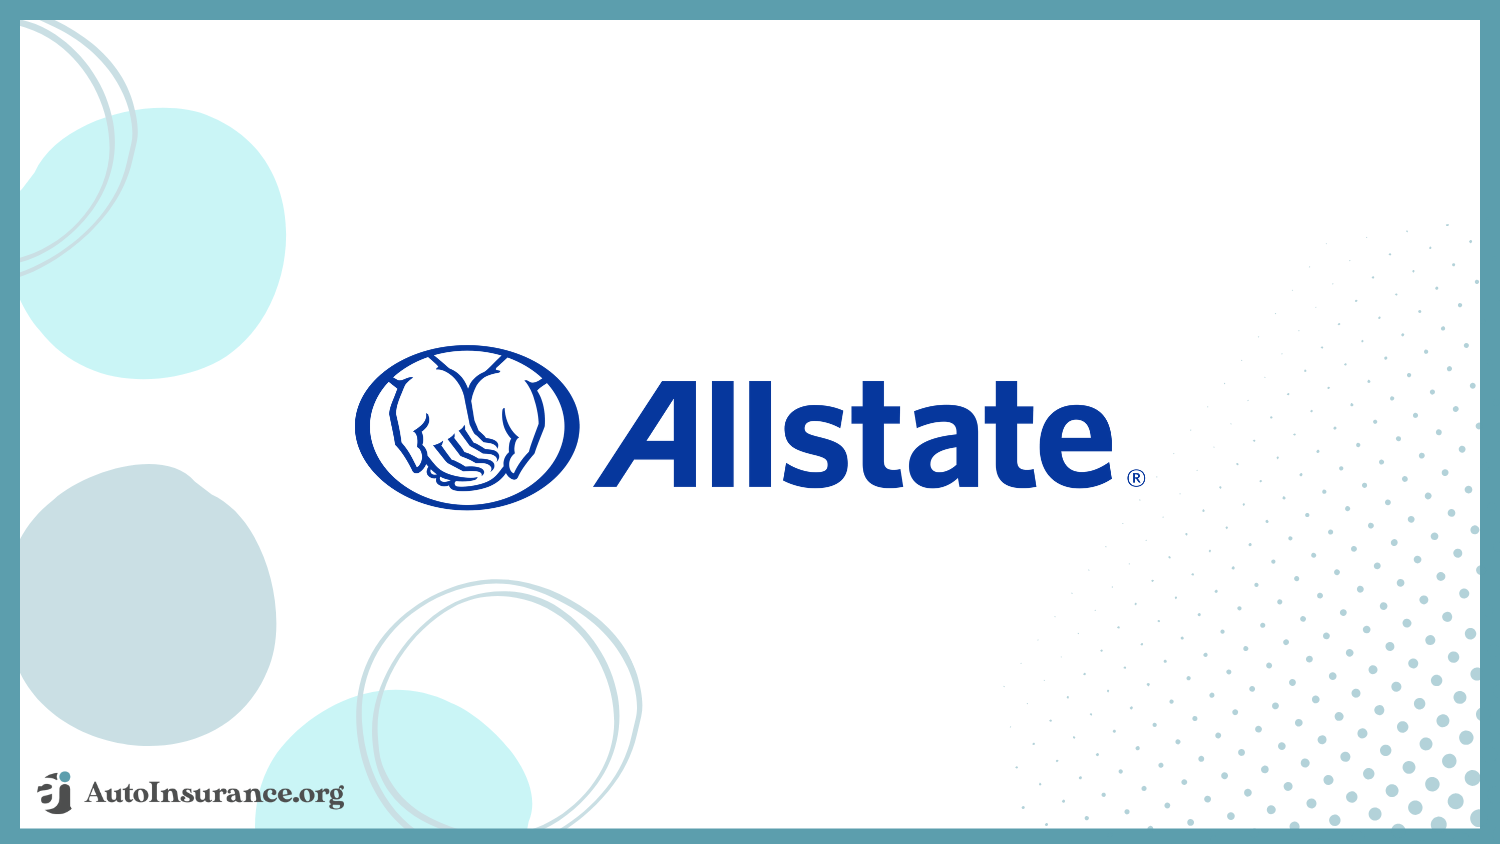 Allstate: Best Auto Insurance for Families